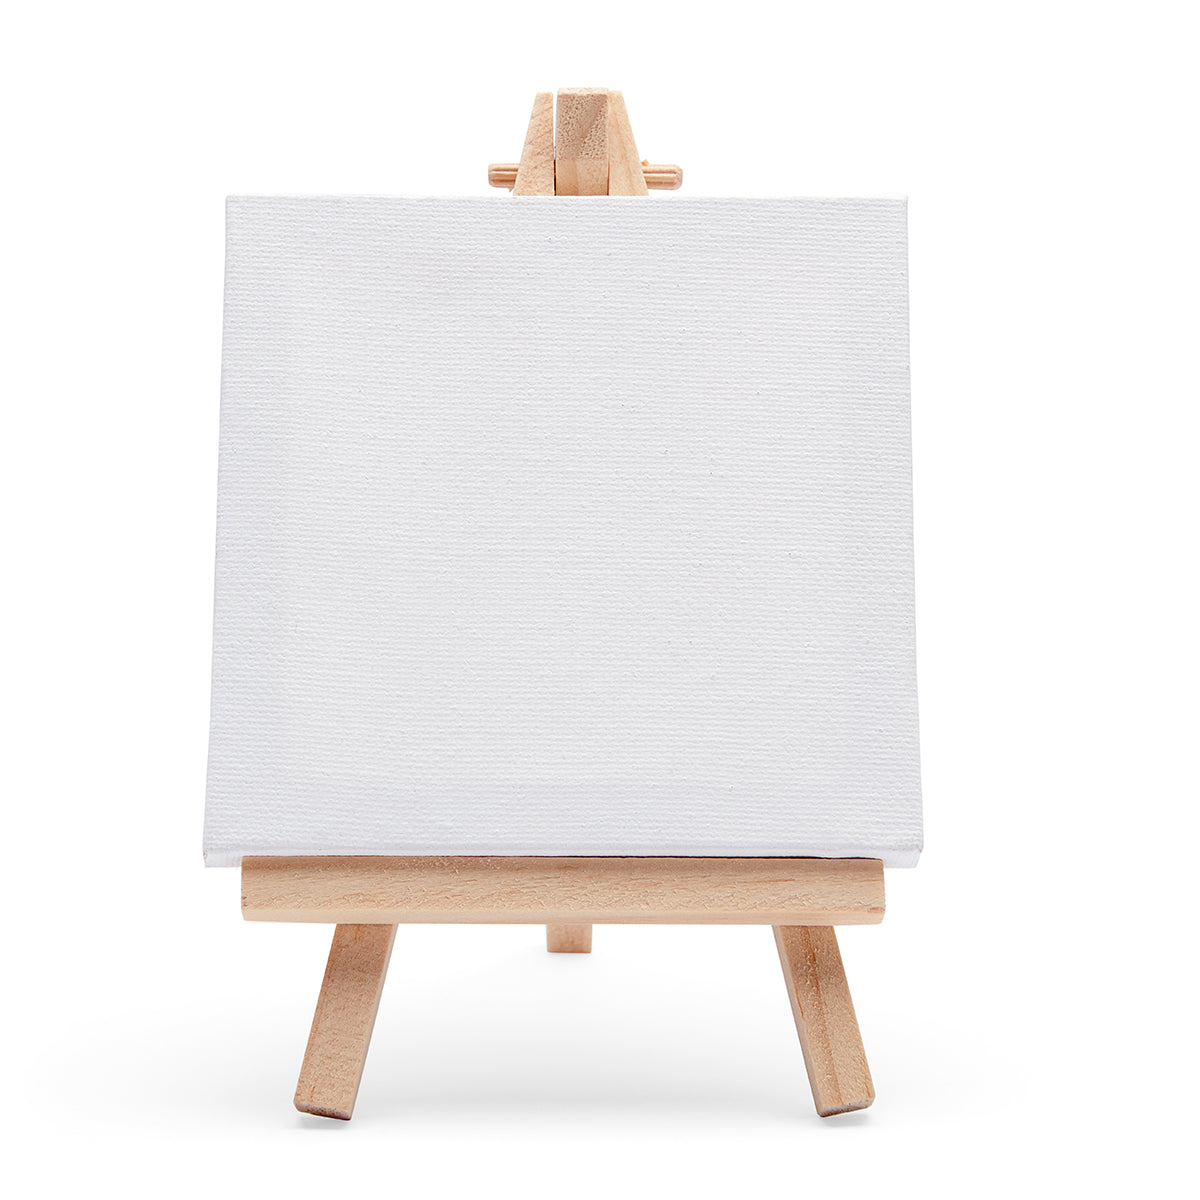 KINGART® Mini 4x 4 White Stretched Painting Canvas and 5 Wood Easels  Set, 8-Pack